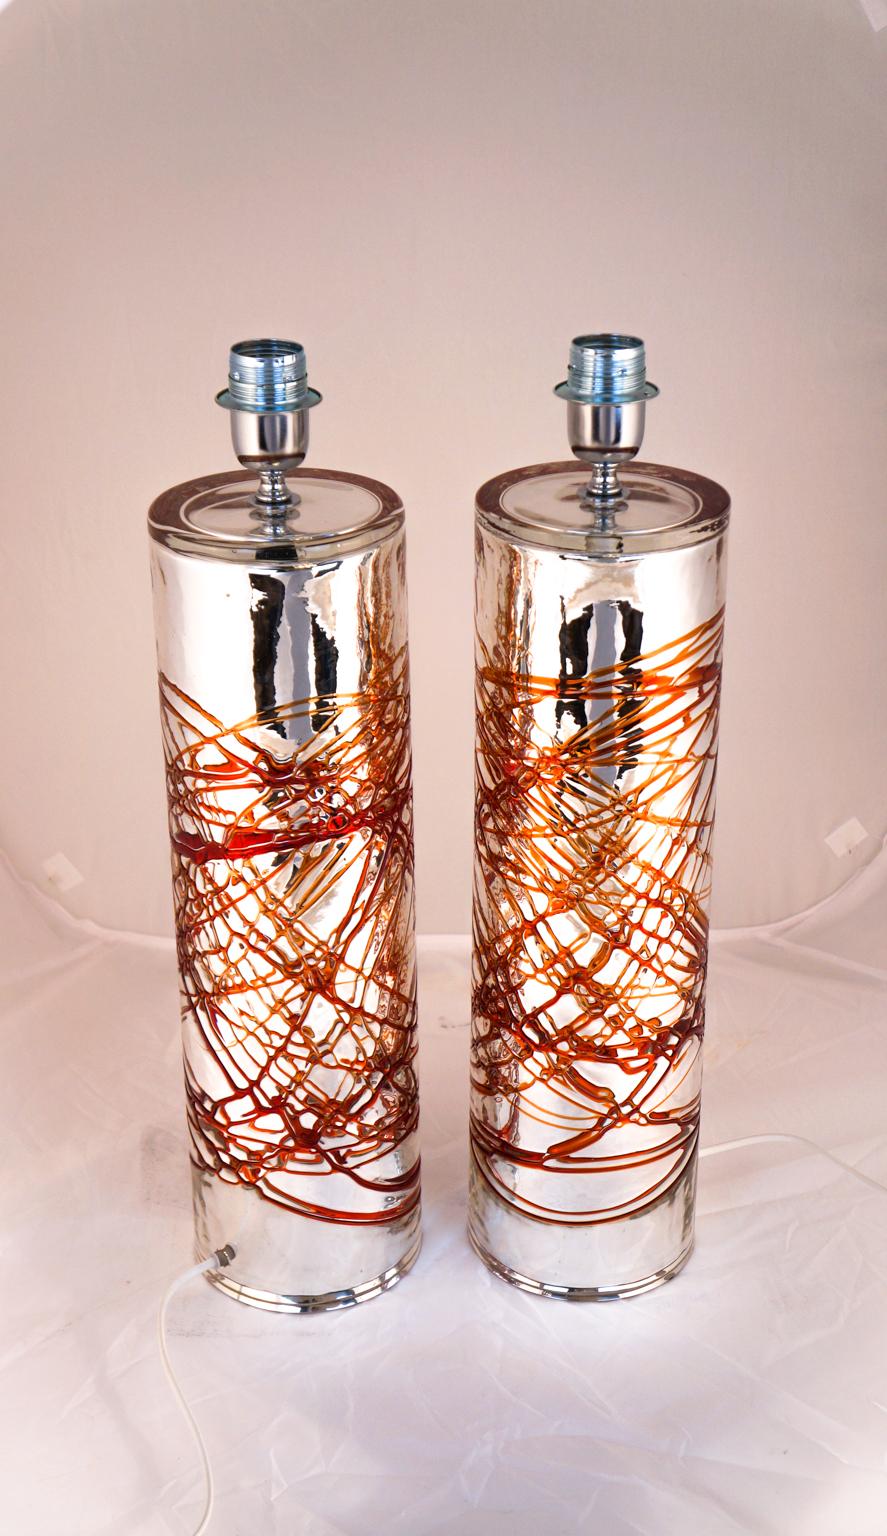 Alberto Donà Mid-Century Modern Pair of Murano Glass Table Lamps Signed, 1990s For Sale 6